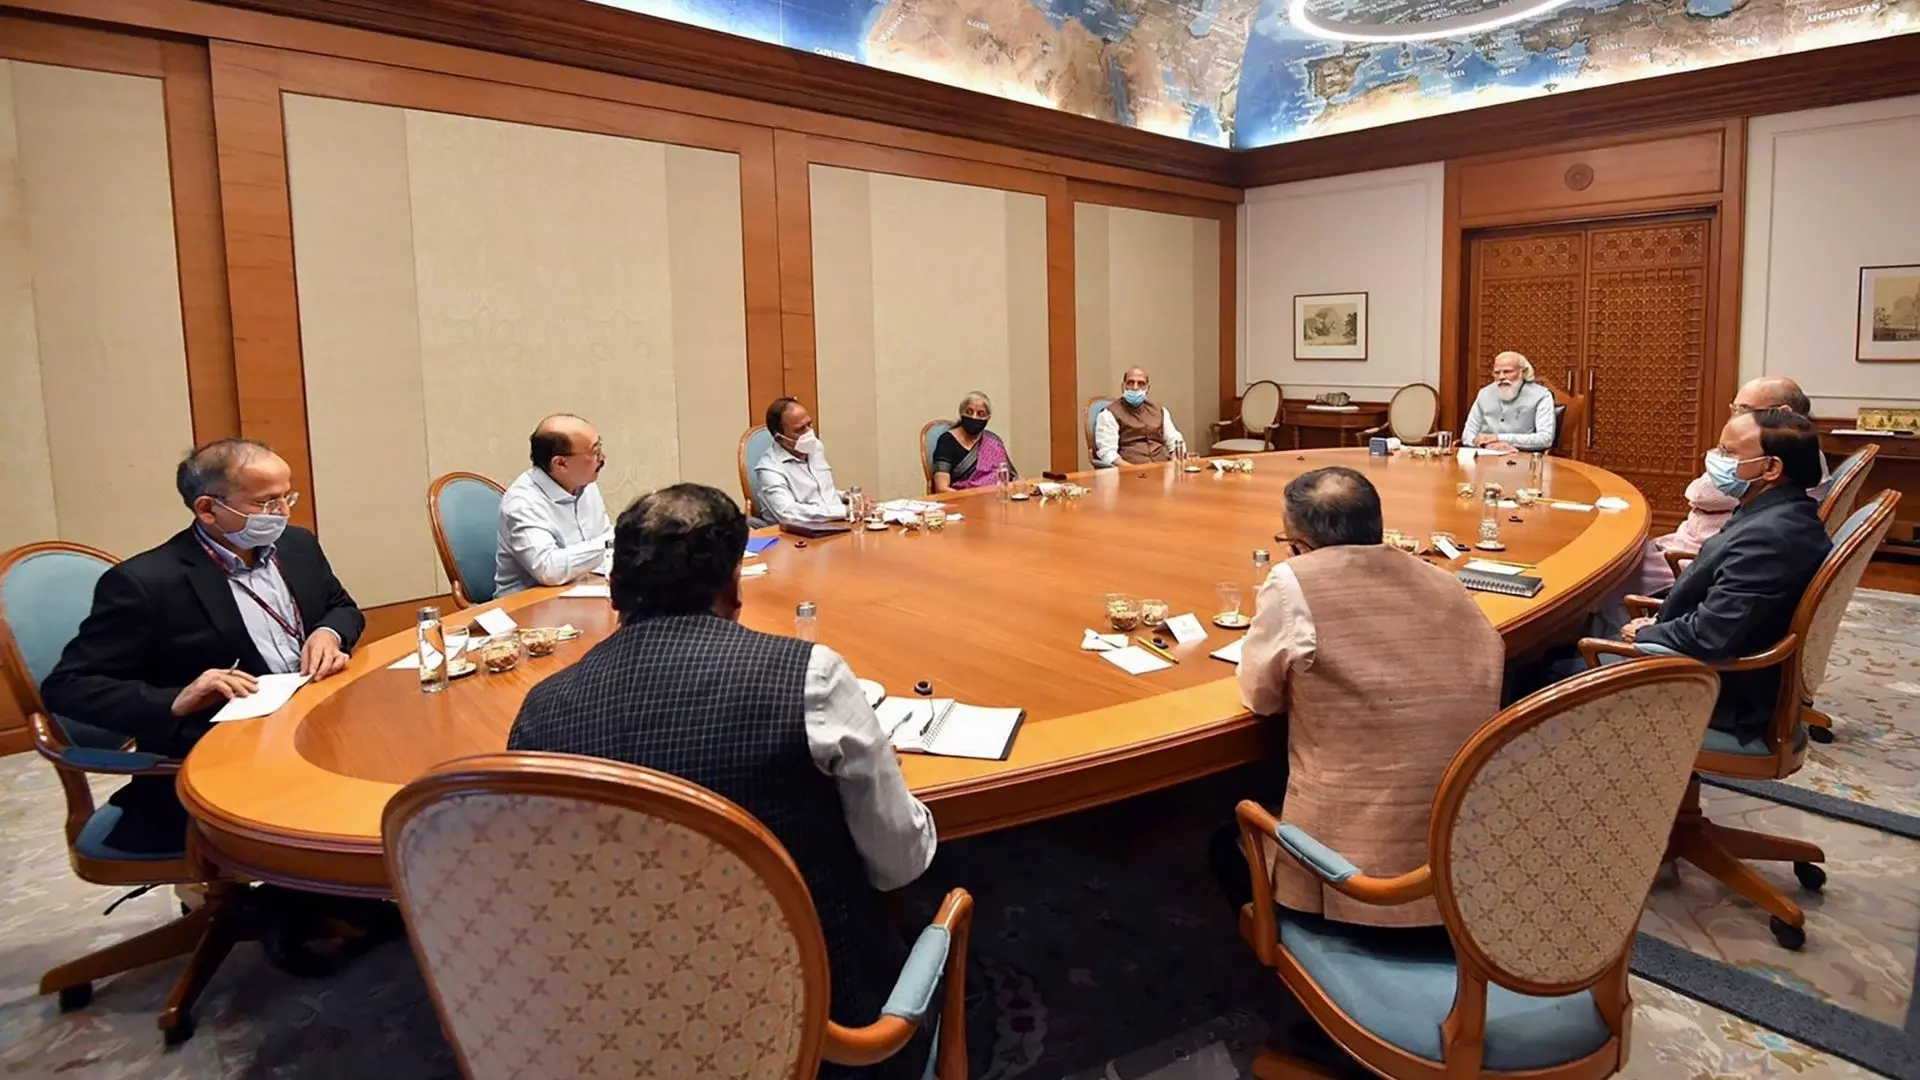 National Security Affairs Committee Meeting With Prime Minister Modi About The Indians in Afghanistan